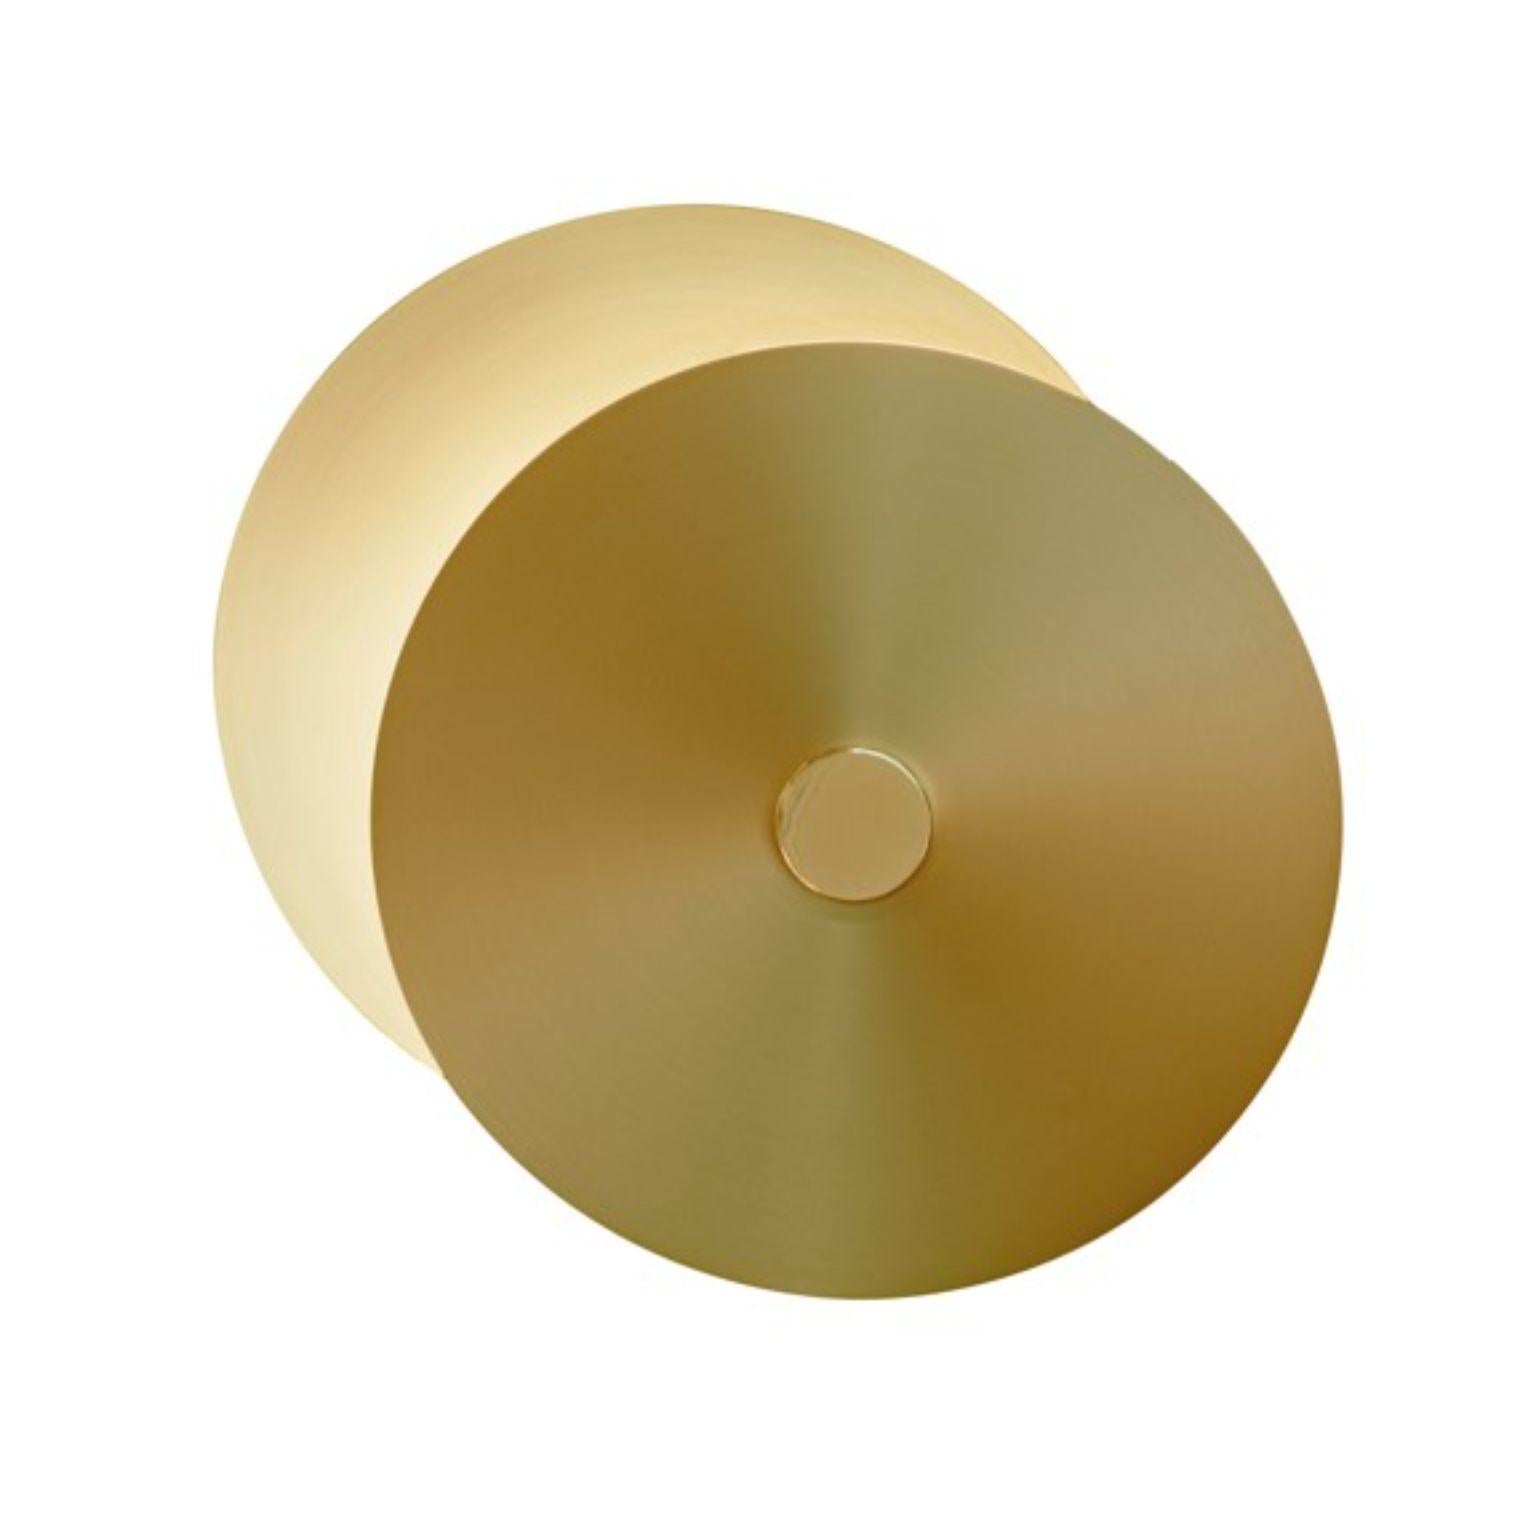 Eclipse XL wall light by Hervé Langlais
Dimensions: D46 x W6.8 x H38 cm
Materials: Solid brass.
Others finishes and dimensions are available.

All our lamps can be wired according to each country. If sold to the USA it will be wired for the USA